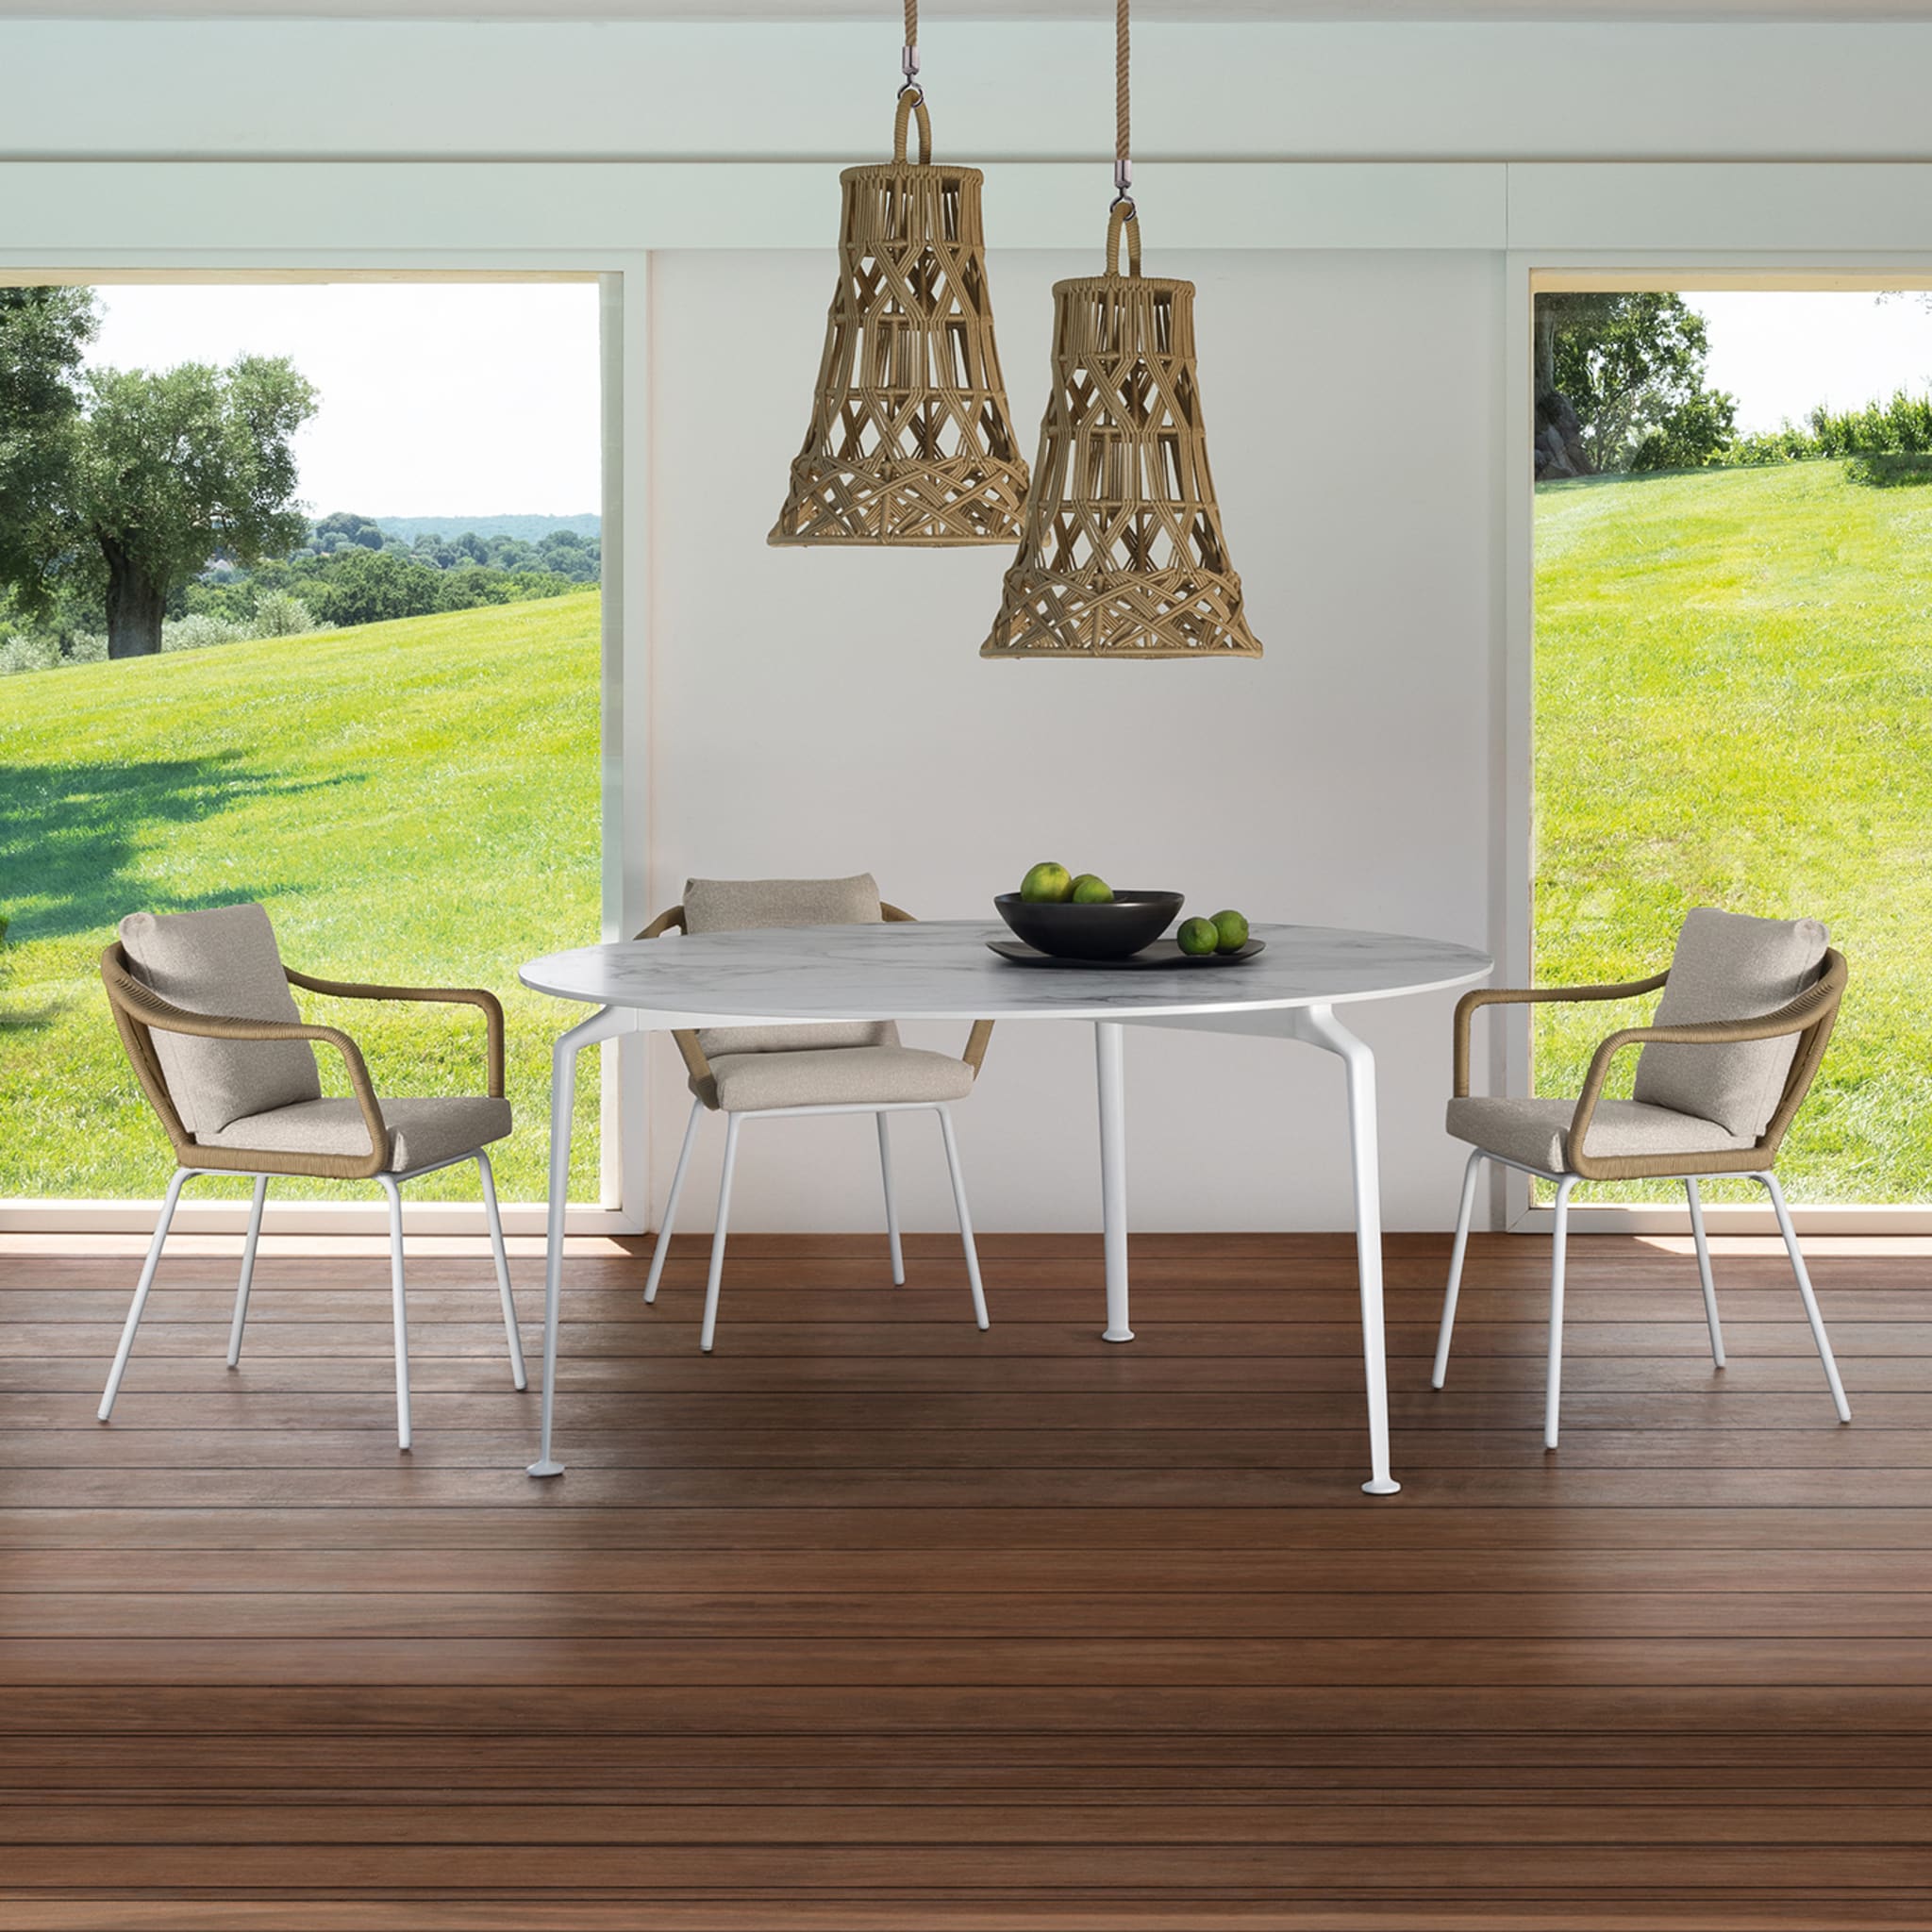 Cruise Alu White Dining Chair by Ludovica & Roberto Palomba - Alternative view 1